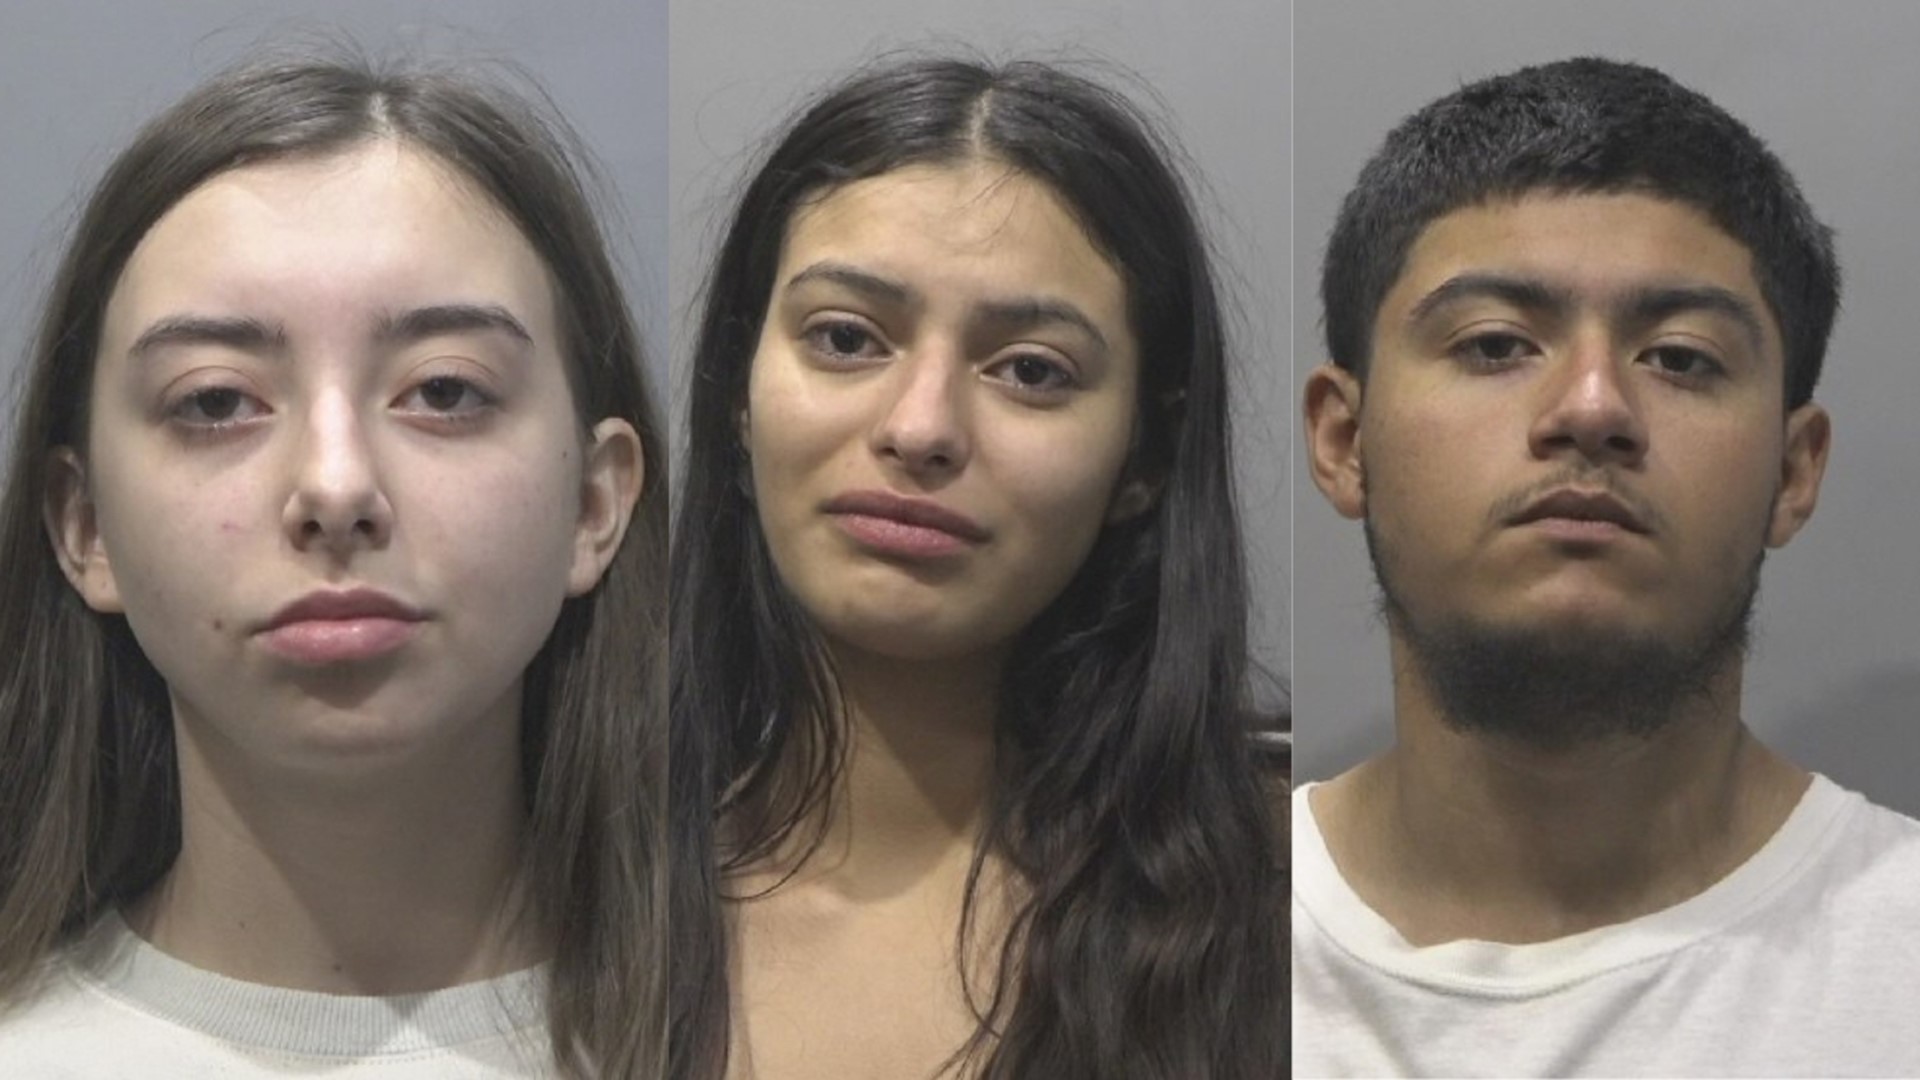 Jeanette Clifton, 18, Serenity Delgado, 17, and Cruz Martinez, 18, are accused in the shooting death of Nathaniel Navarro at Satsuma Park.